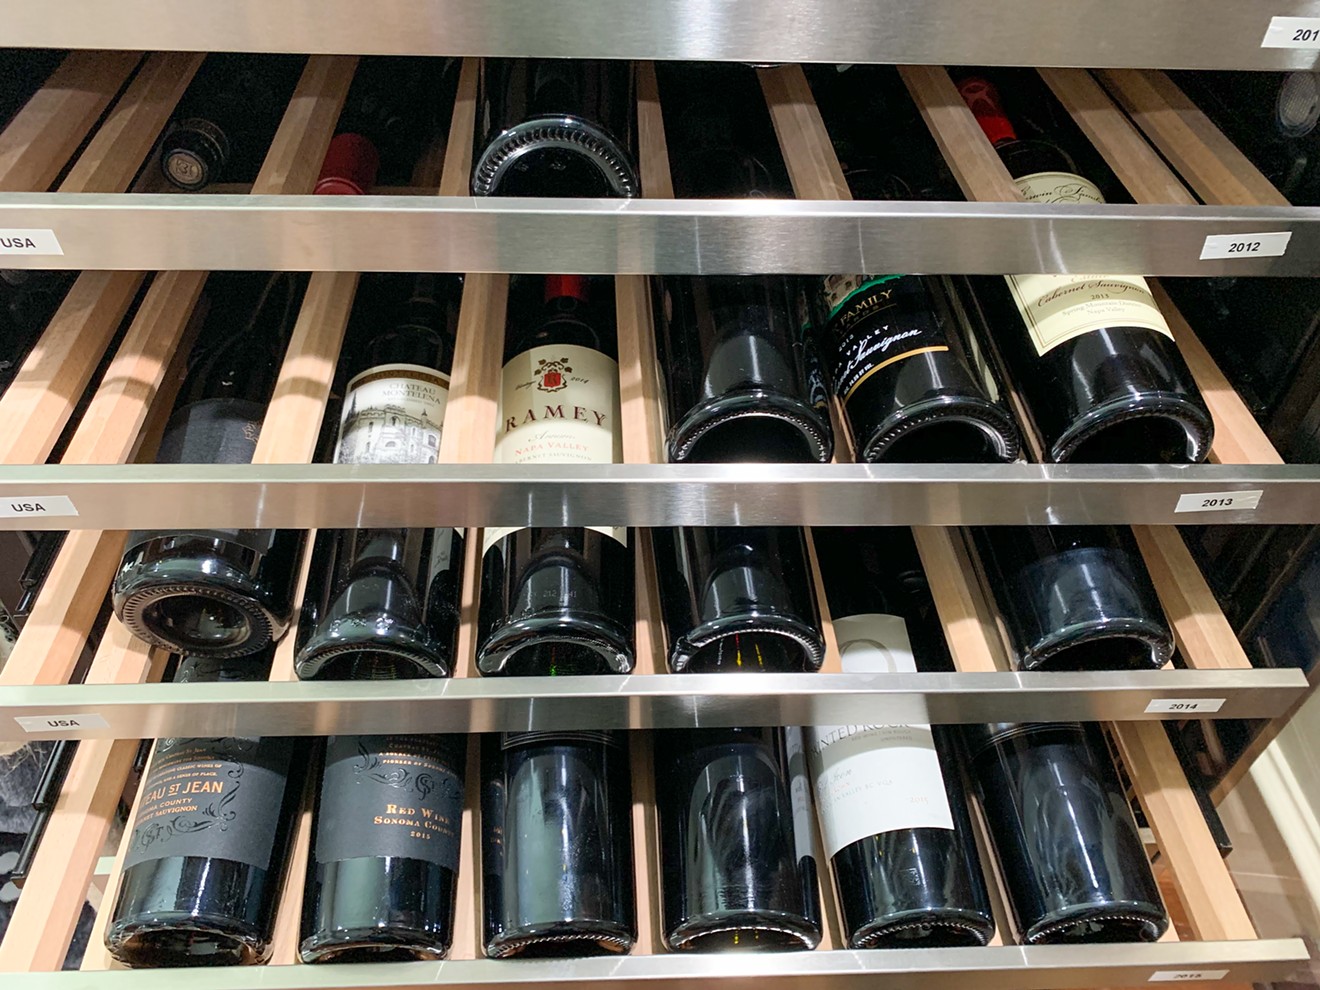 If you're looking to keep a solid stock of wine, just in case, fill it up with wines you buy in your own city.